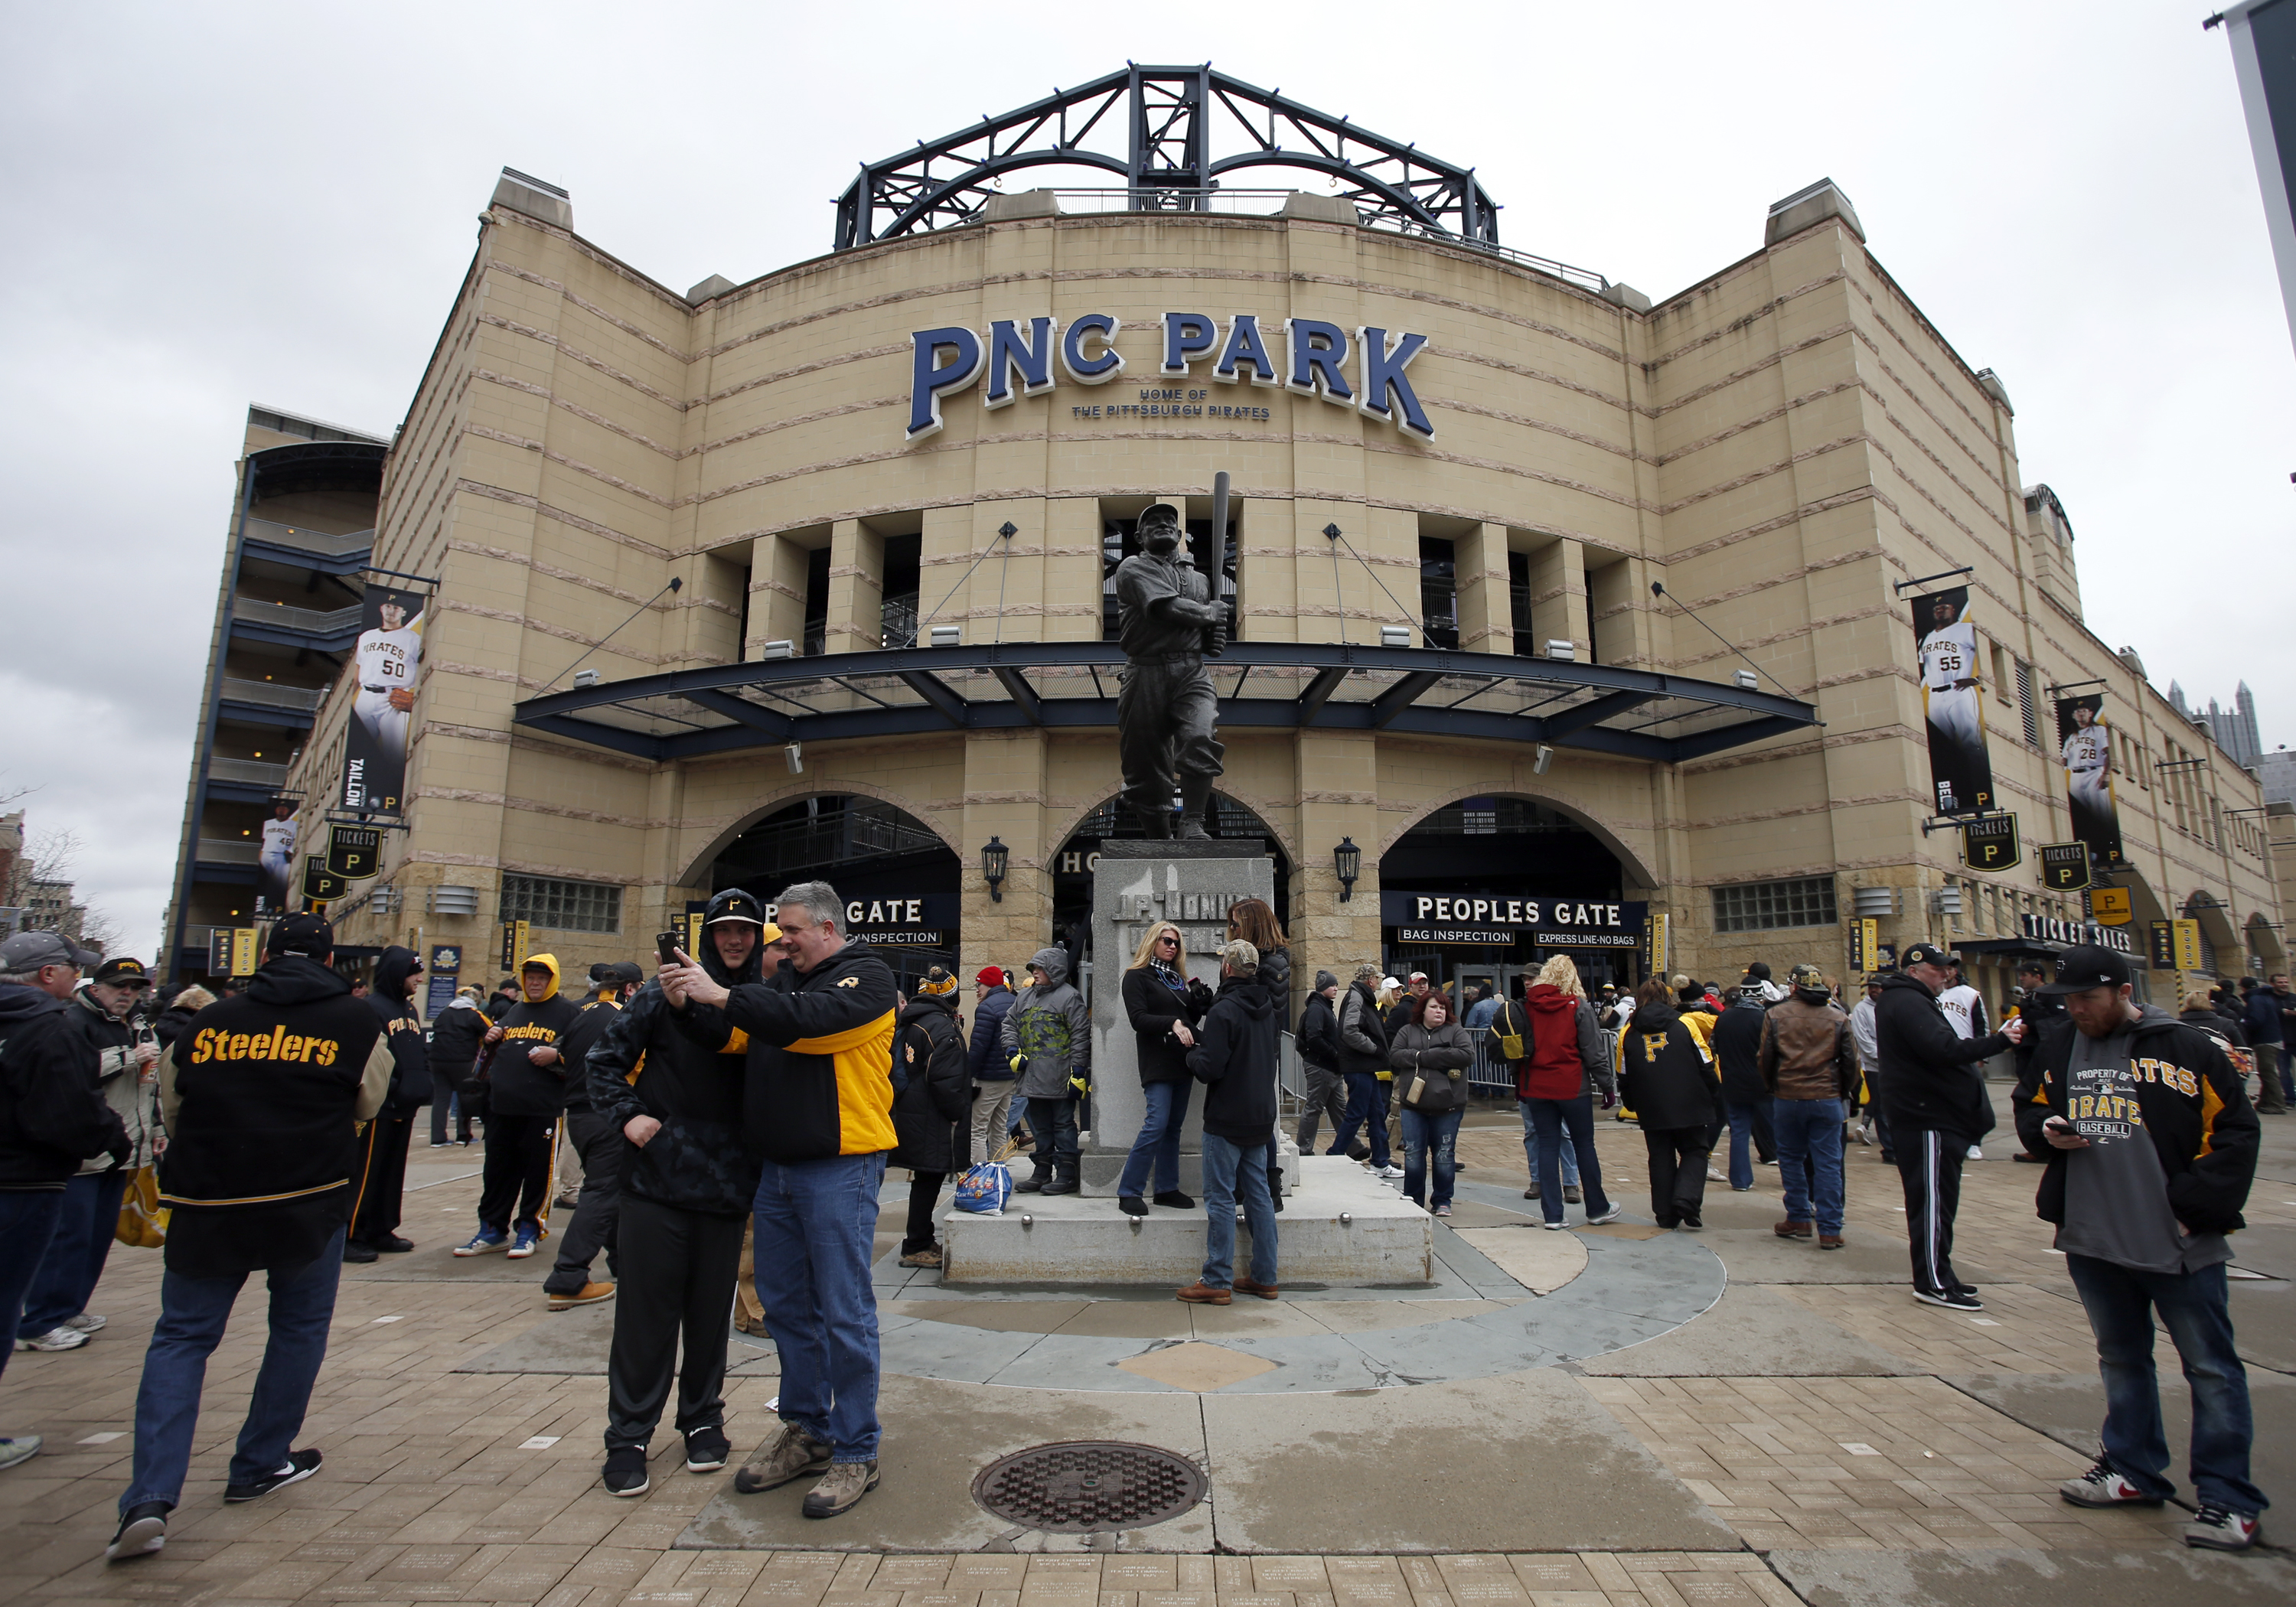 Meet the 18-year-old Pirates fan who told Bob Nutting to sell the